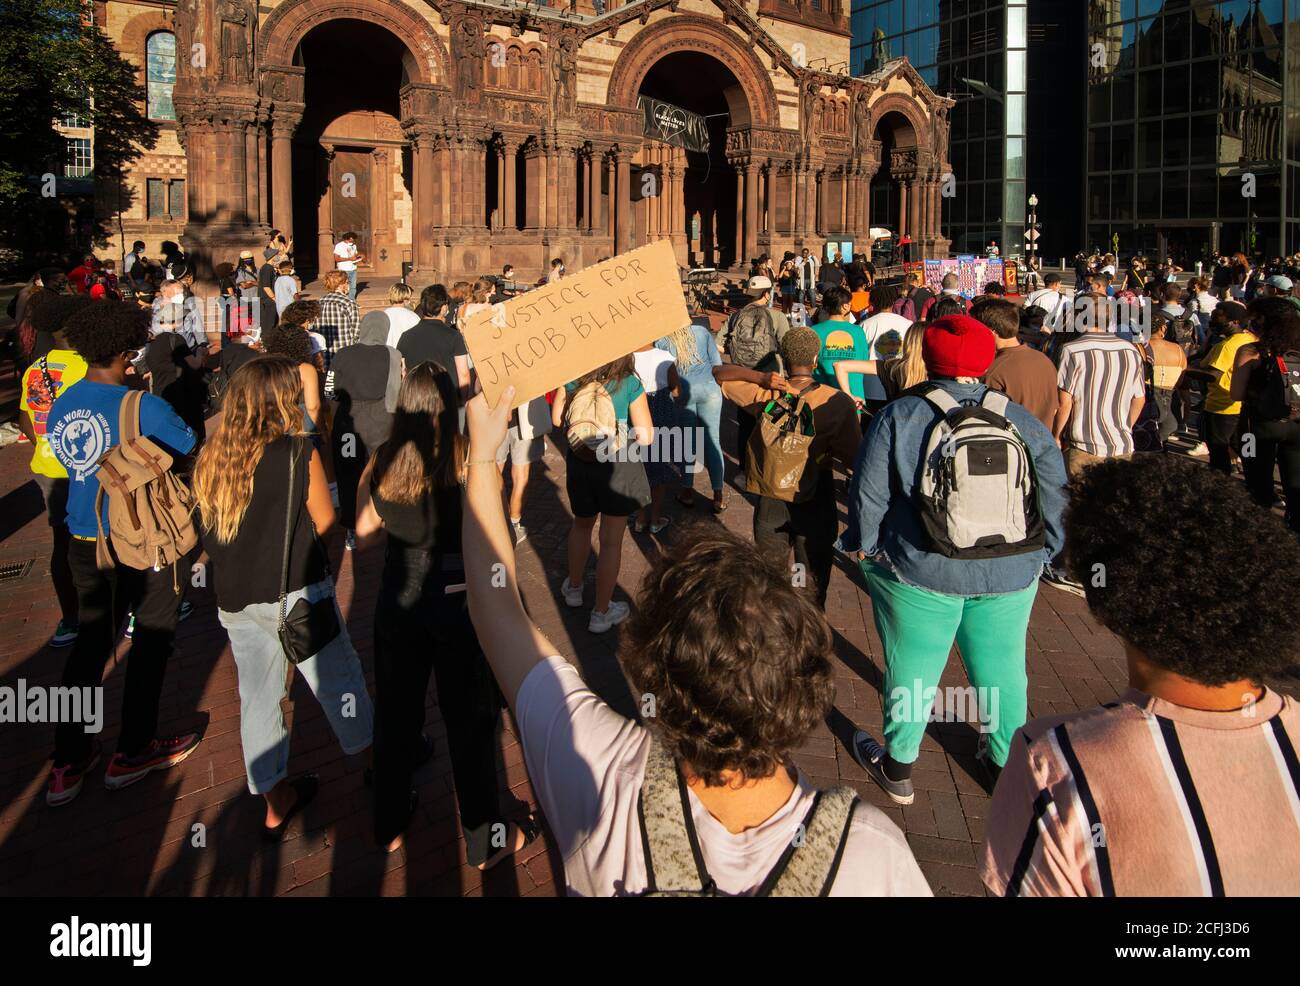 Boston, USA. 05th Sep, 2020. Rally for Black Lives, Black Voices & Jacob Blake.  Boston, MA, USA. Copley Square.  More than 500 gathered in Copley Square, in front of Trinity Church in central Boston on Sept. 5th  2020 in support of Black Lives Matter. Photo shows a Caucasian student holding a sign calling for 'Justice for Jacob Blake.'  Blake, a 29-year-old Black Man who was shot seven times in the back in Kenosha Wisconsin on August 23rd, 2020.  Credit: Chuck Nacke / Alamy Live News Stock Photo